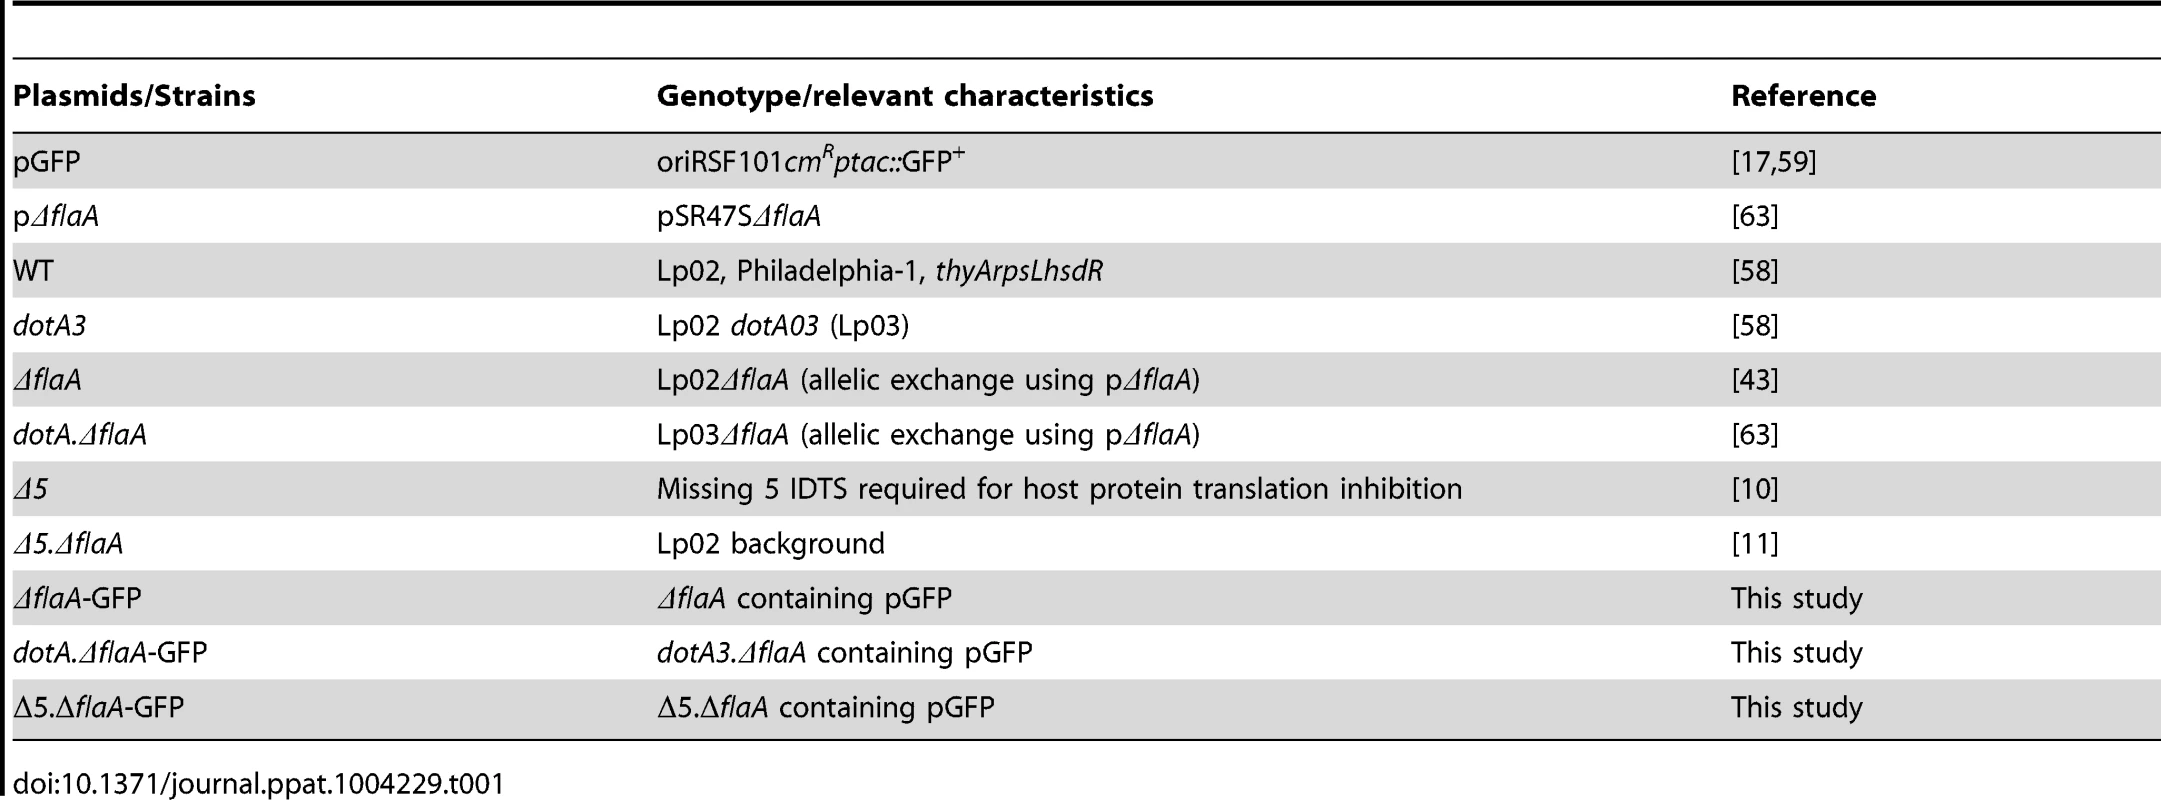 Plasmids and strains used in this study.